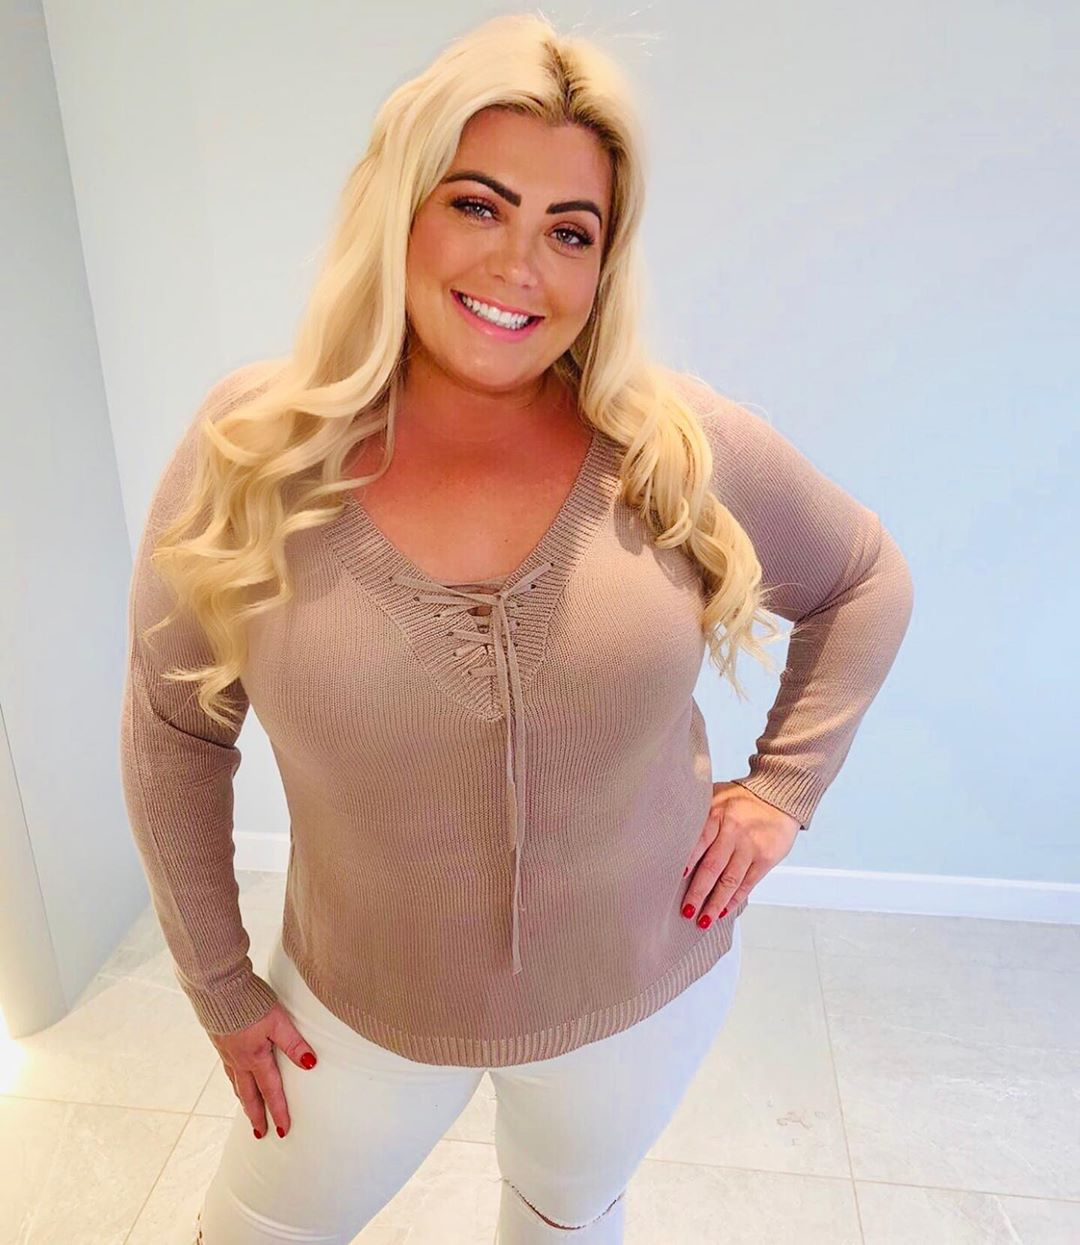 Gemma Collins slams Towie and sparks feud as she brands stars ‘terrible’